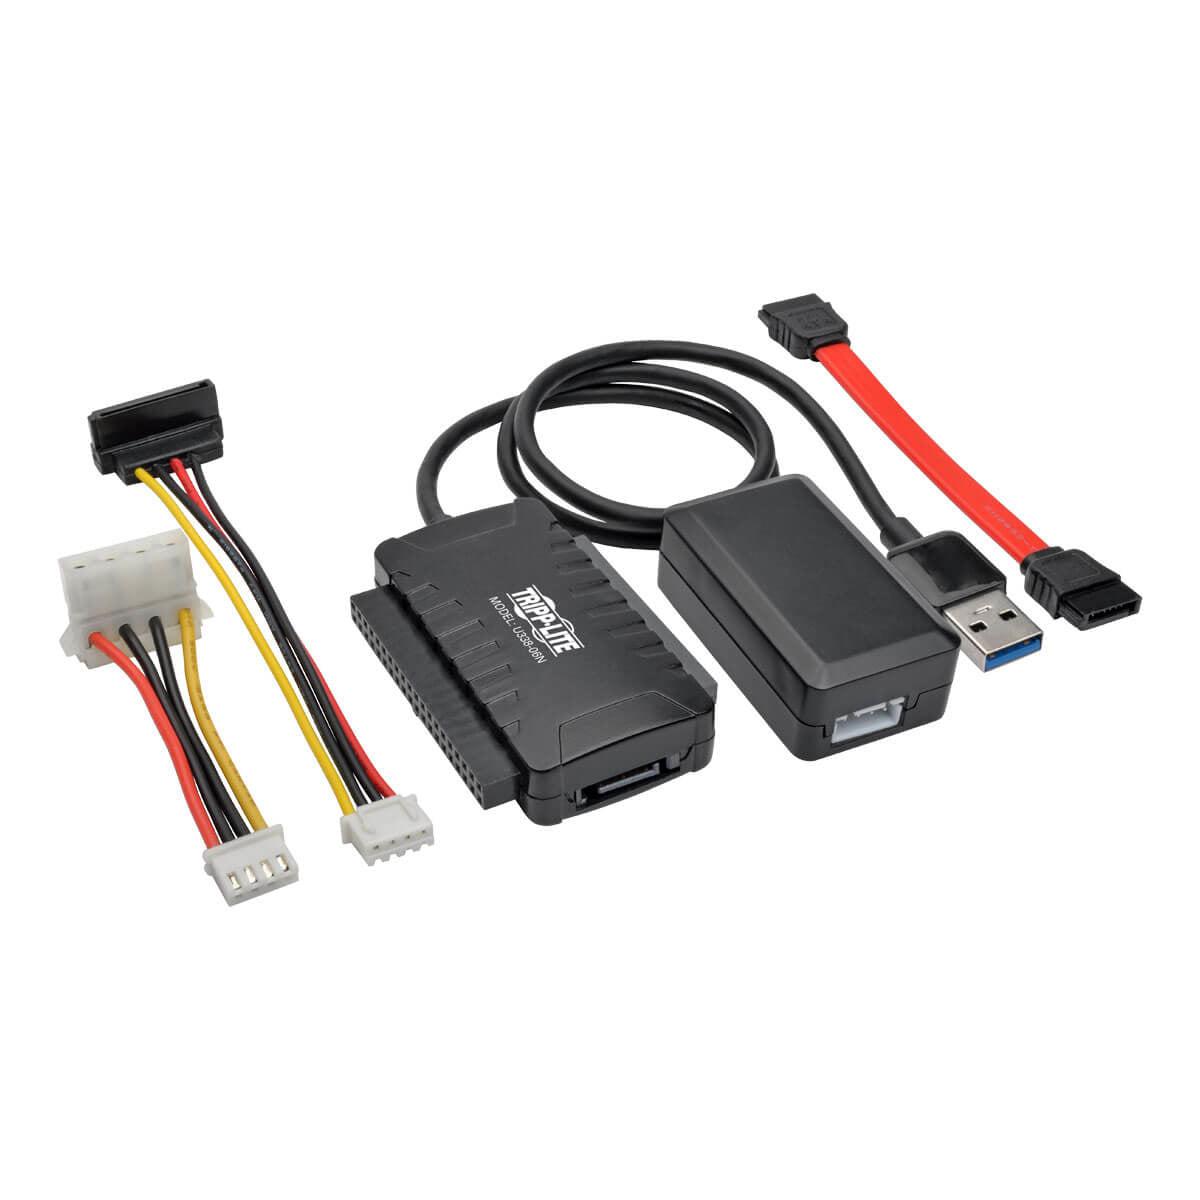 Tripp Lite U338-06N Usb 3.0 Superspeed To Sata/Ide Adapter With Built-In Usb Cable, 2.5 In., 3.5 In. And 5.25 In. Hard Drives